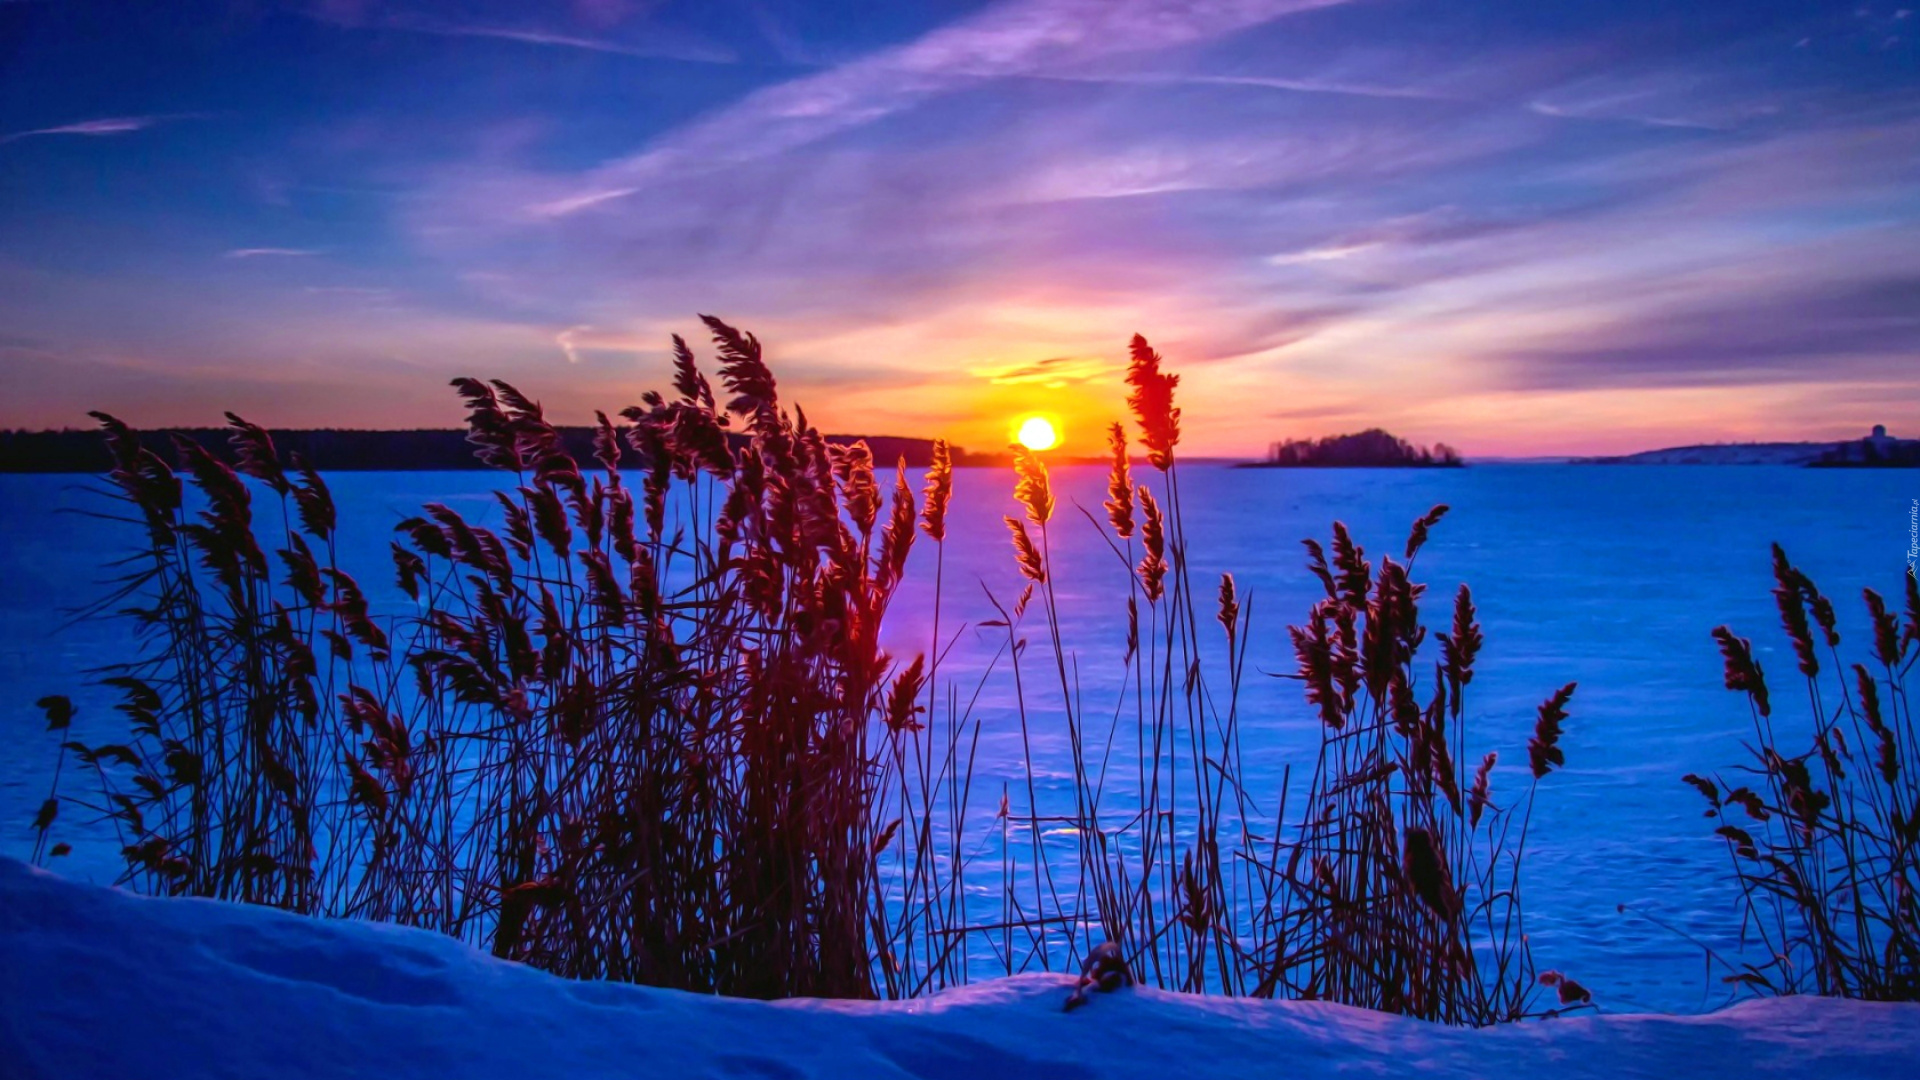 Sunset, Winter, Snow, Nature, Natural Landscape. Wallpaper in 1920x1080 Resolution